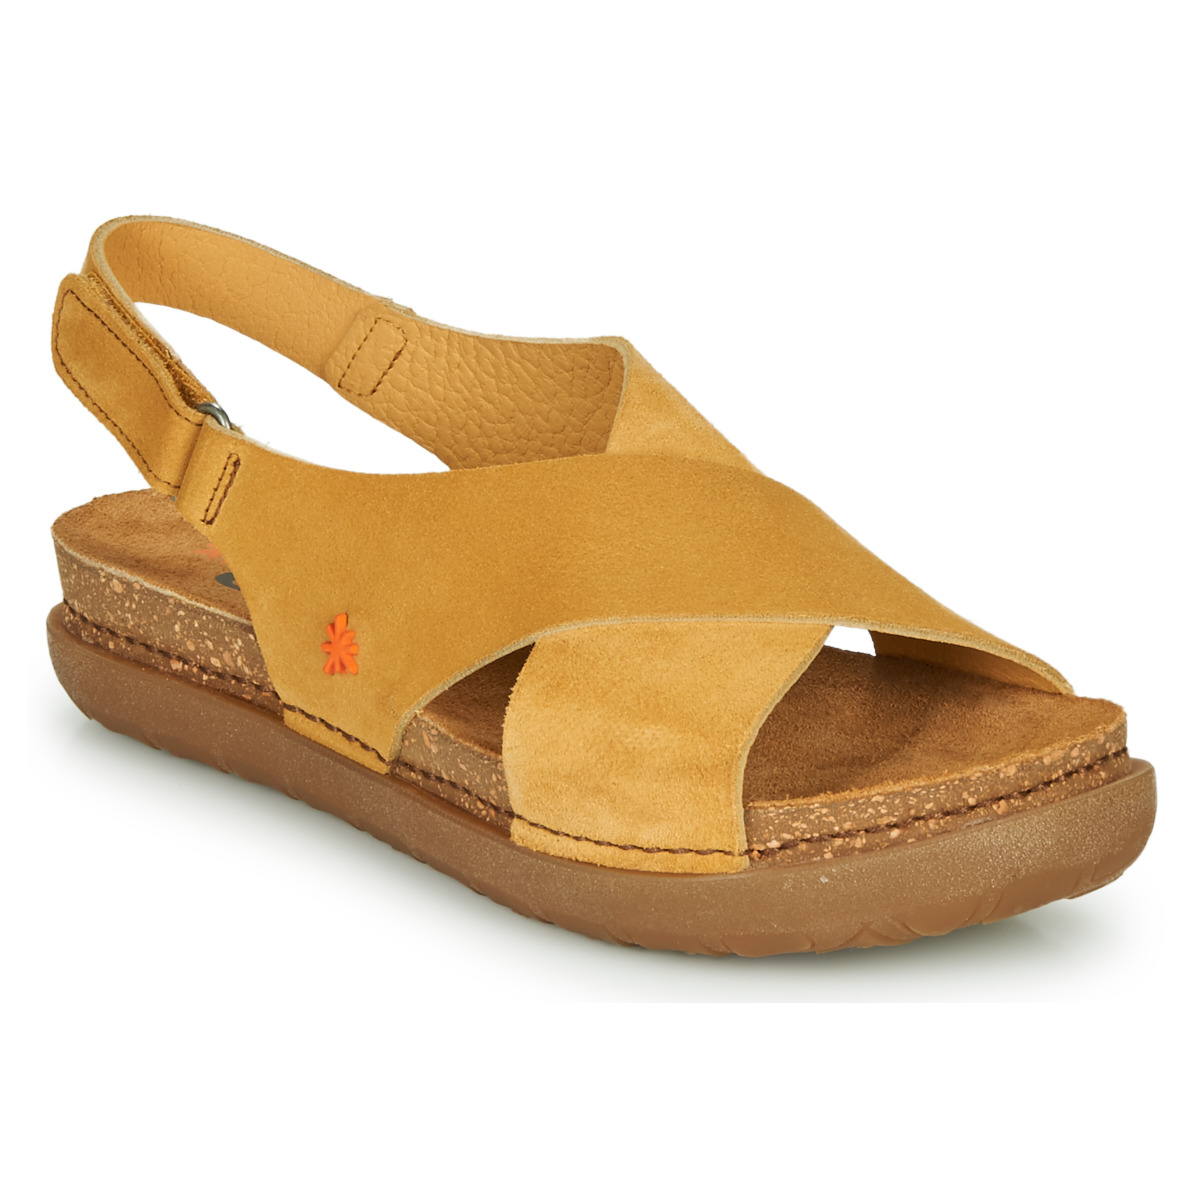 Definitive Operation possible Unreadable Art RHODES Mustard - Fast delivery | Spartoo Europe ! - Shoes Sandals Women  72,00 €